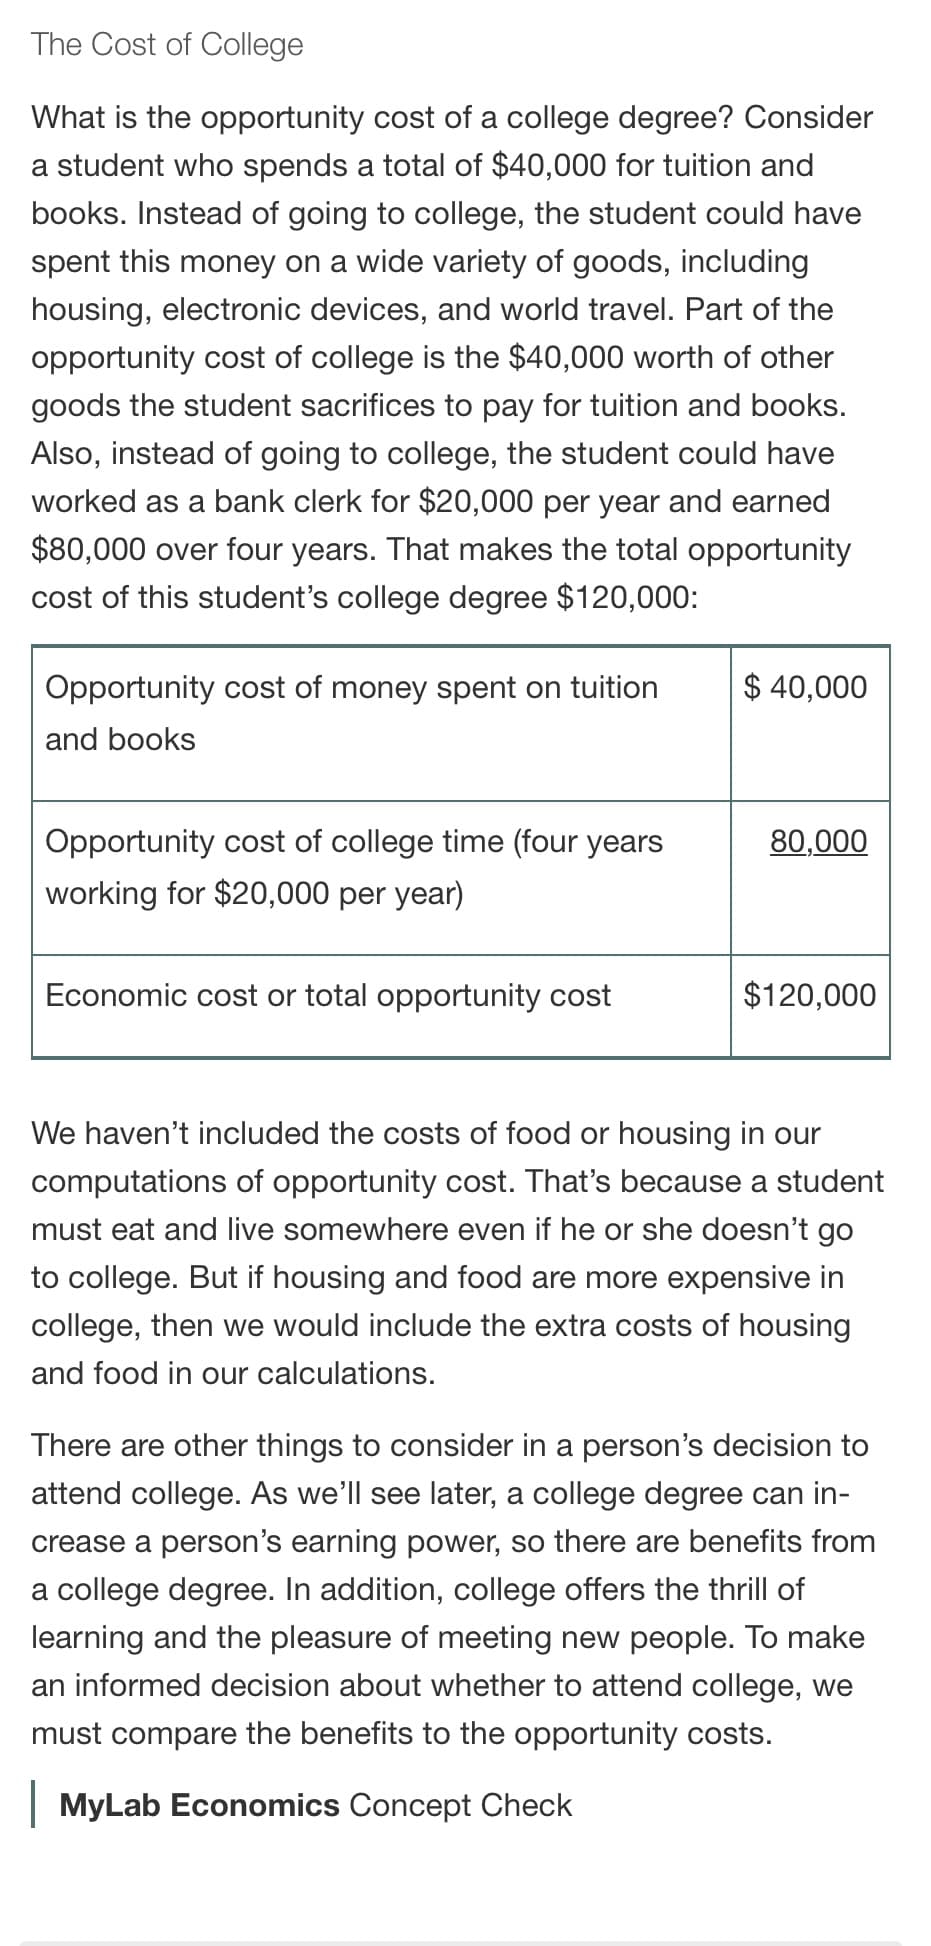 The Cost of College
What is the opportunity cost of a college degree? Consider
a student who spends a total of $40,000 for tuition and
books. Instead of going to college, the student could have
spent this money on a wide variety of goods, including
housing, electronic devices, and world travel. Part of the
opportunity cost of college is the $40,000 worth of other
goods the student sacrifices to pay for tuition and books.
Also, instead of going to college, the student could have
worked as a bank clerk for $20,000 per year and earned
$80,000 over four years. That makes the total opportunity
cost of this student's college degree $120,000:
Opportunity cost of money spent on tuition
$ 40,000
and books
Opportunity cost of college time (four years
80,000
working for $20,000 per year)
Economic cost or total opportunity cost
$120,000
We haven't included the costs of food or housing in our
computations of opportunity cost. That's because a student
must eat and live somewhere even if he or she doesn't go
to college. But if housing and food are more expensive in
college, then we would include the extra costs of housing
and food in our calculations.
There are other things to consider in a person's decision to
attend college. As we'll see later, a college degree can in-
crease a person's earning power, so there are benefits from
a college degree. In addition, college offers the thrill of
learning and the pleasure of meeting new people. To make
an informed decision about whether to attend college, we
must compare the benefits to the opportunity costs.
| MyLab Economics Concept Check
